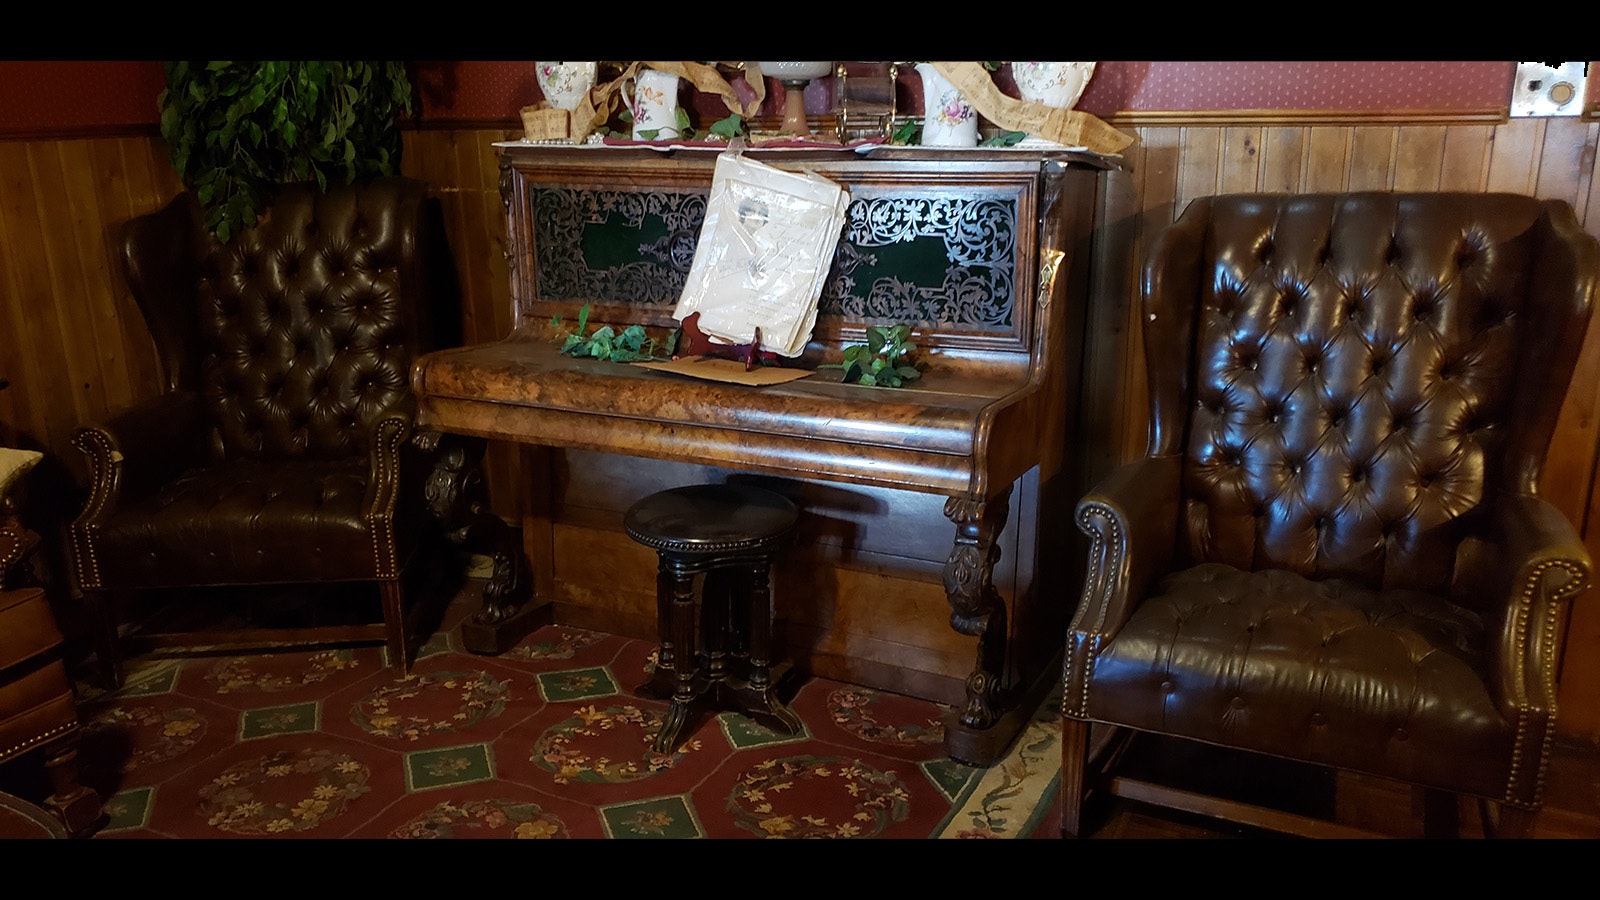 A vintage piano flanked by luxurious antique leather chairs.